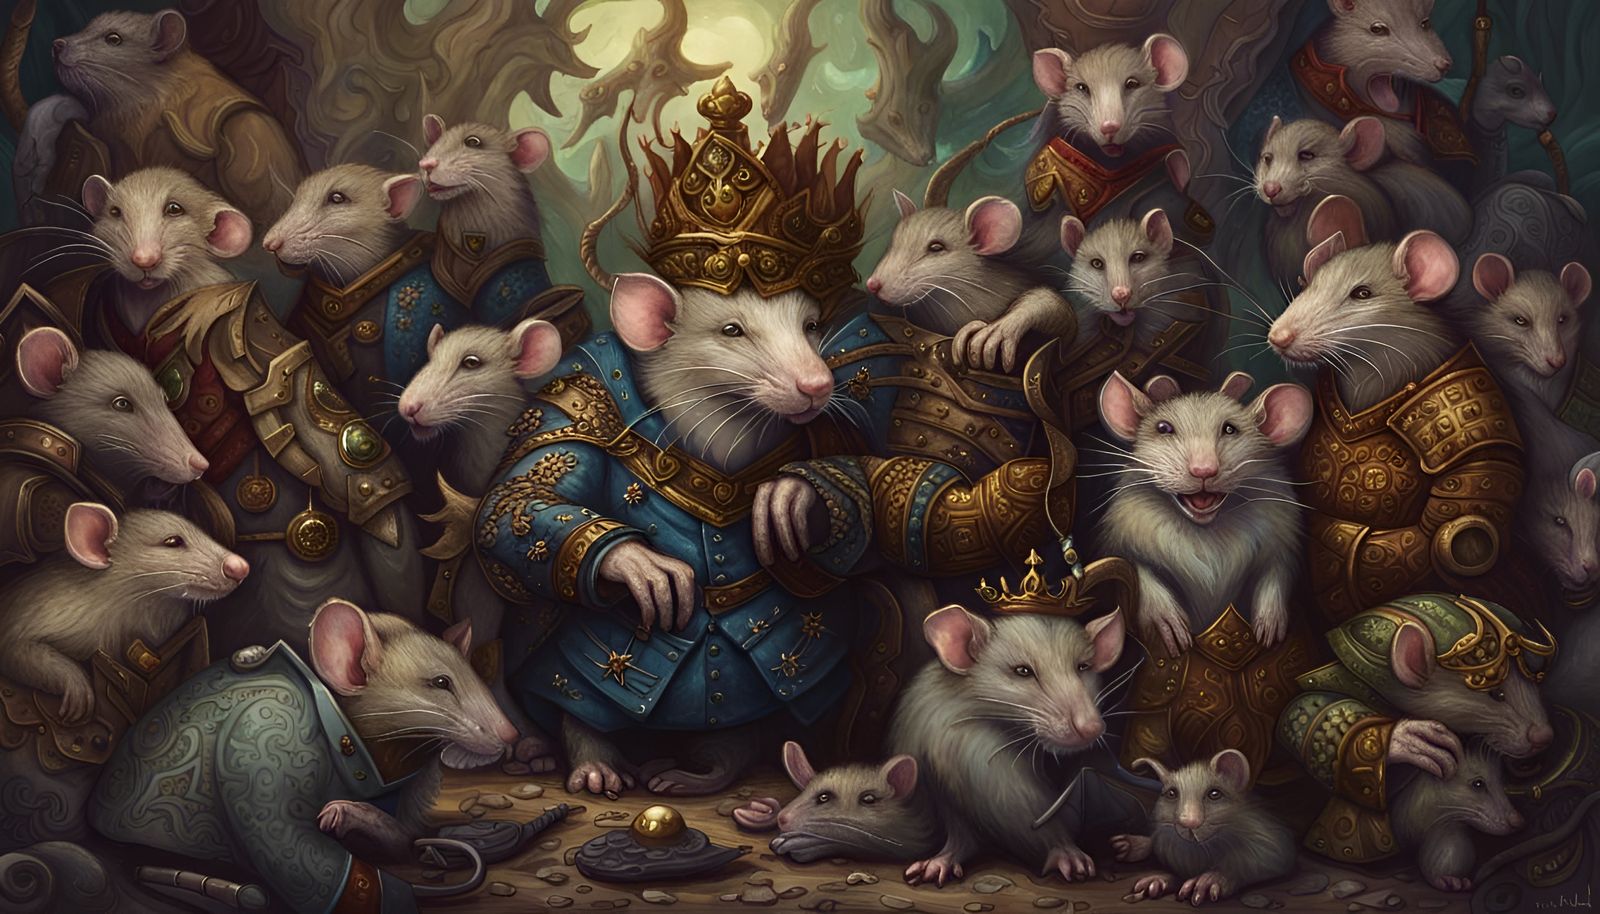 The GREATEST Rat King Of All Time. 